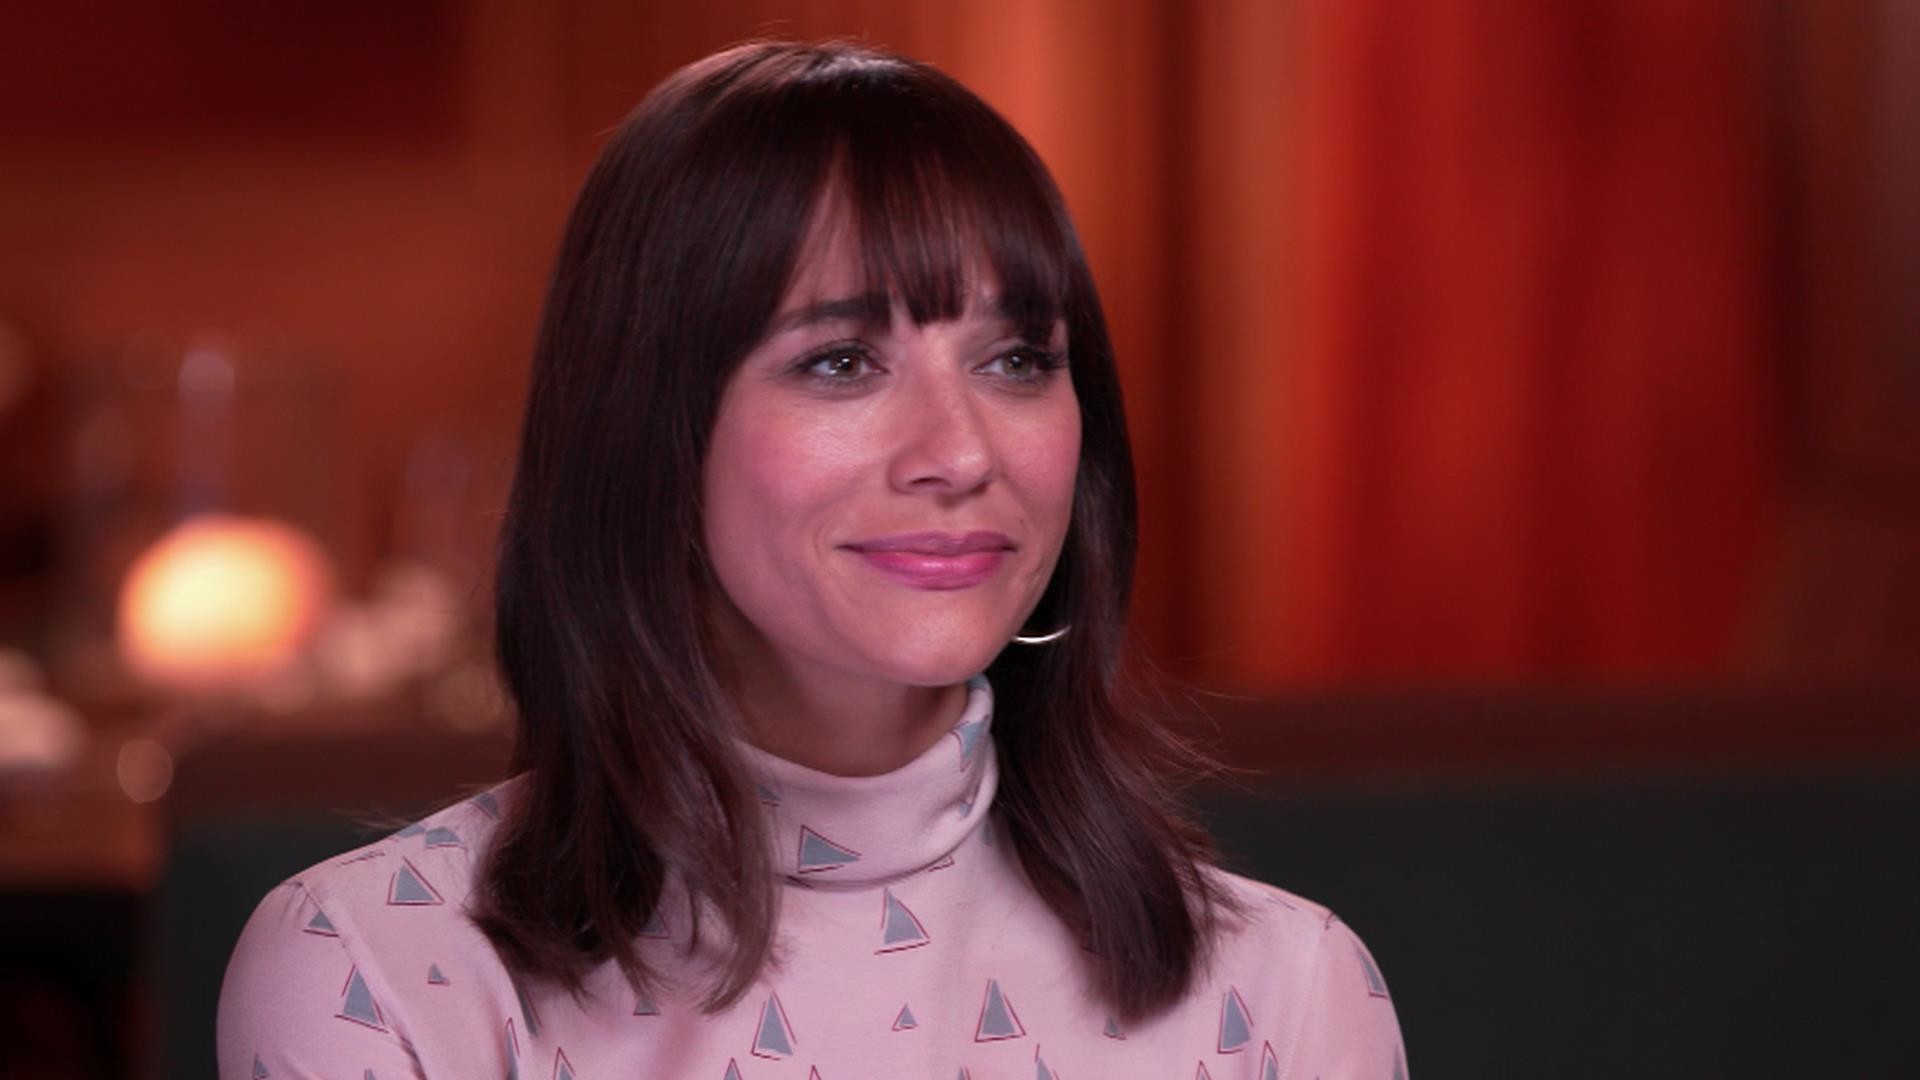 1920x1080 Rashida Jones: Hollywood's obsessed with looks and youth, but 'I have more  to give'